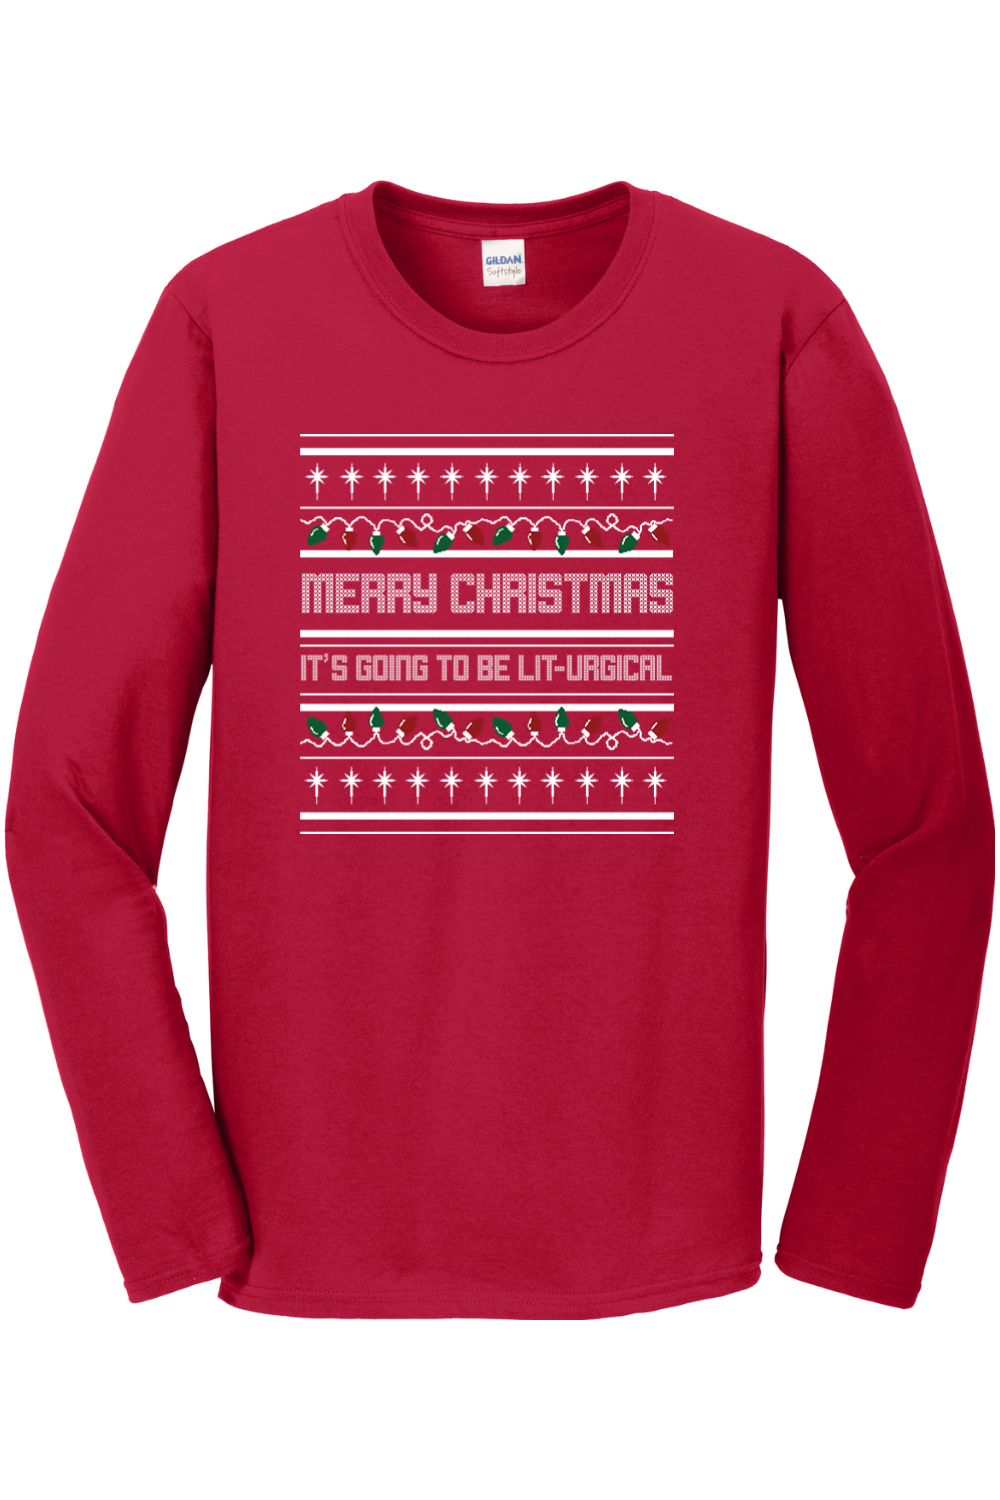 It's Going to be Lit-urgical! - Christmas Long Sleeve